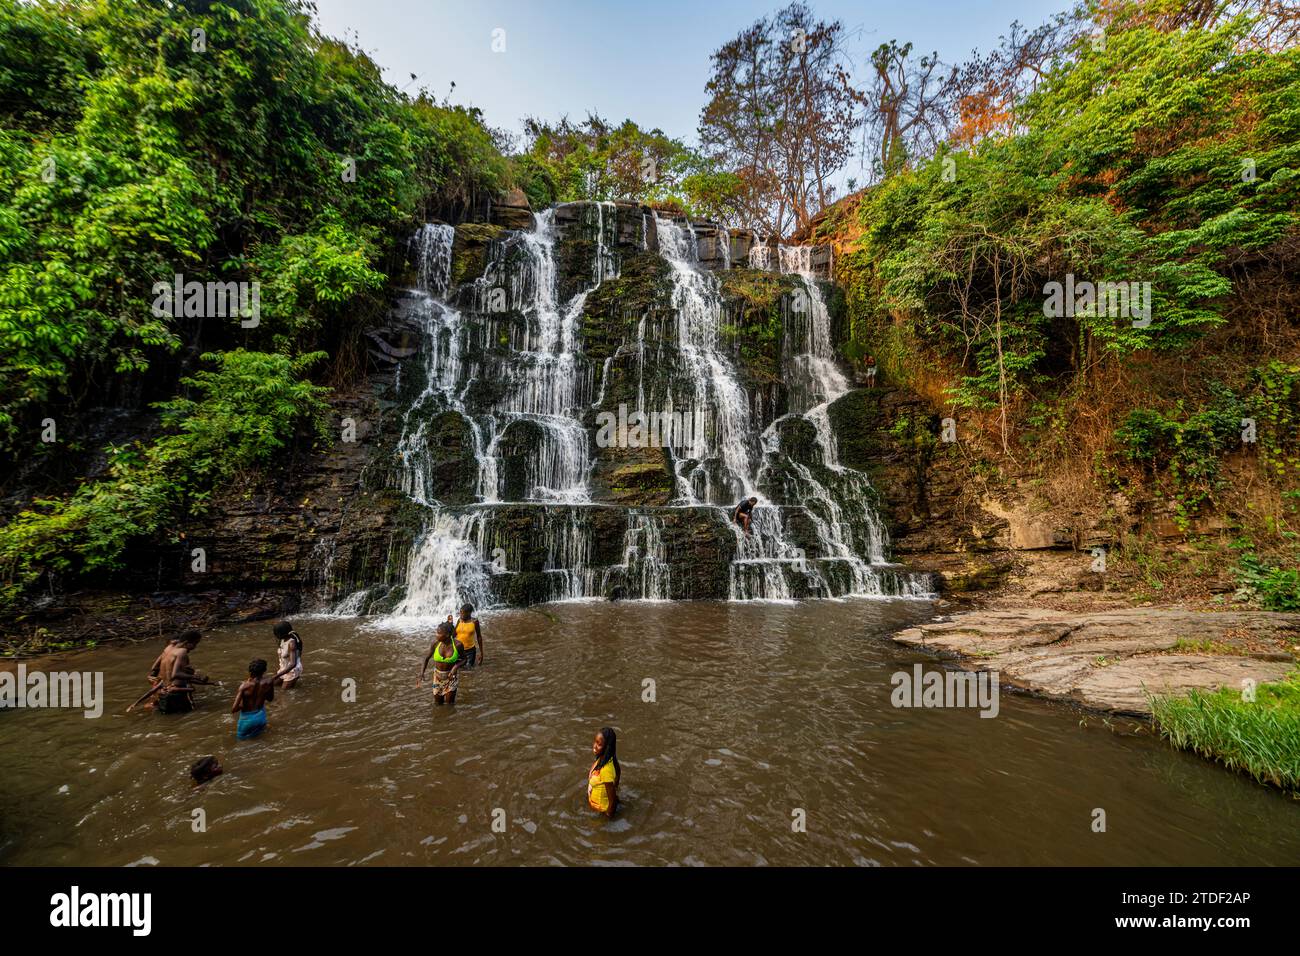 Musseleje waterfalll, Malanje, Angola, Afrique Banque D'Images